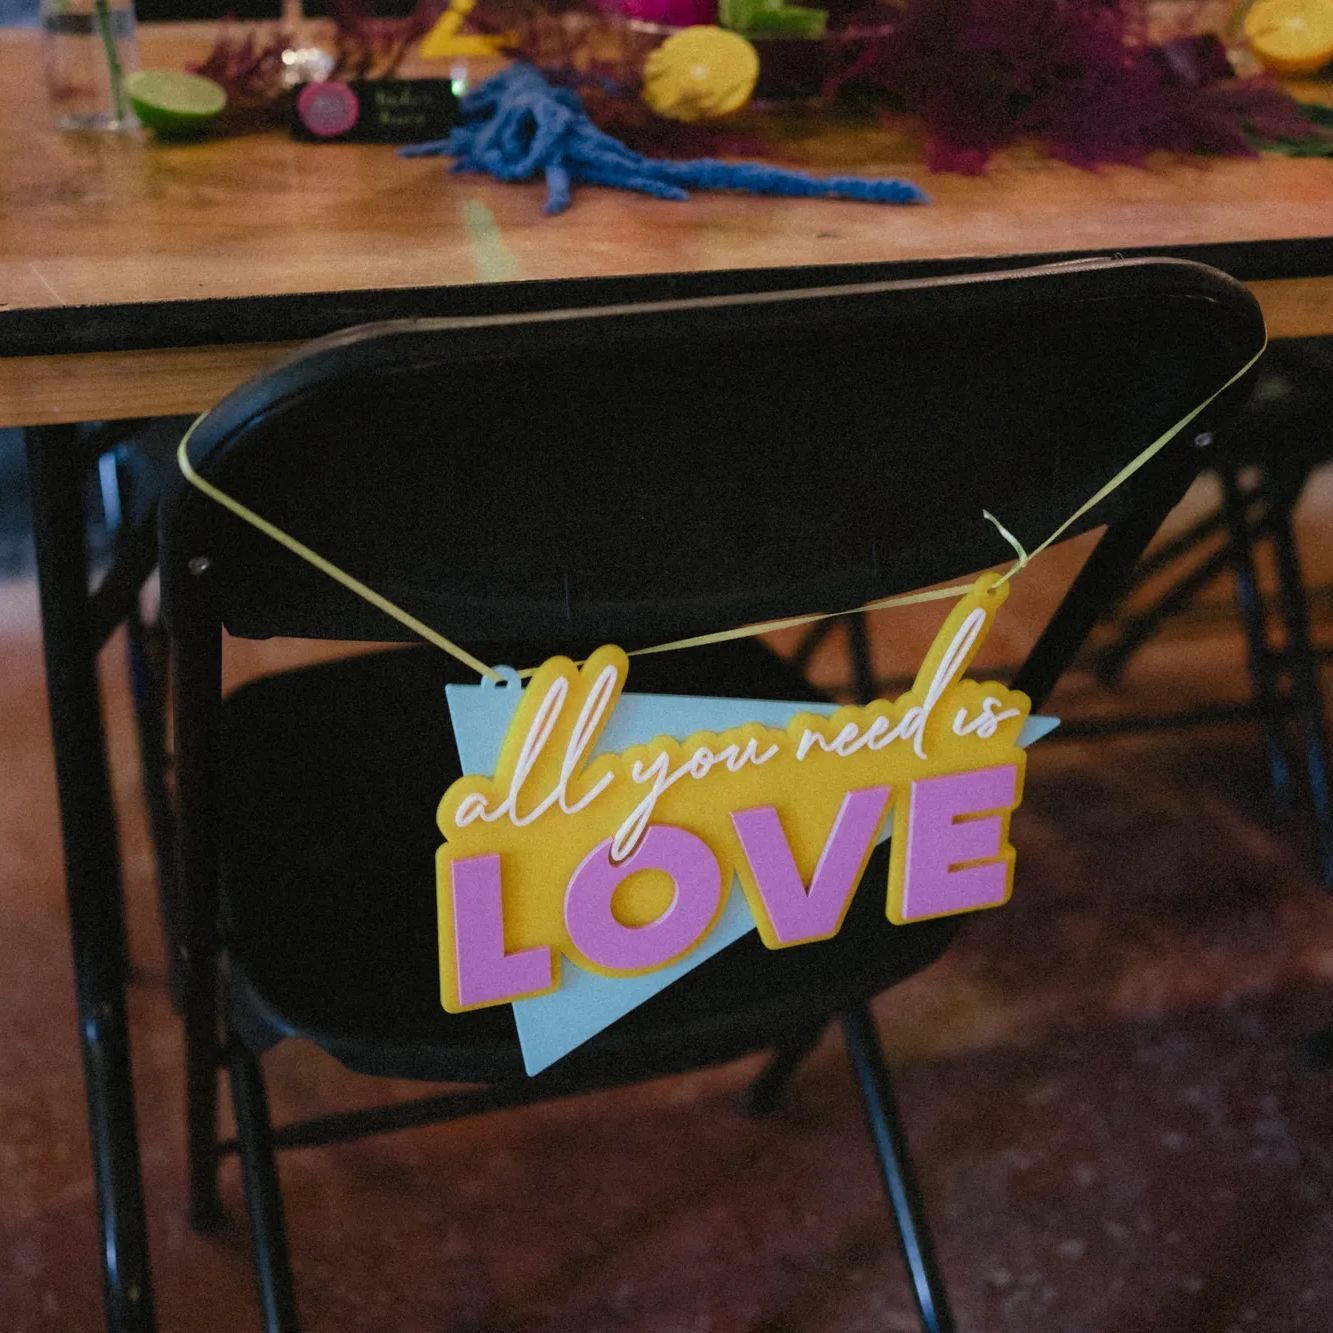 ✨ &quot;All you need is love&quot; Such a cool wedding table sign made for my shoot last week @fairfieldsocialclubmcr 
 
📸 Fun fact: This sign was hand-made by one of my previous brides Sam! @sketch_bysam 
 
 #WeddingGoals #LoveAlways  #weddingstyli